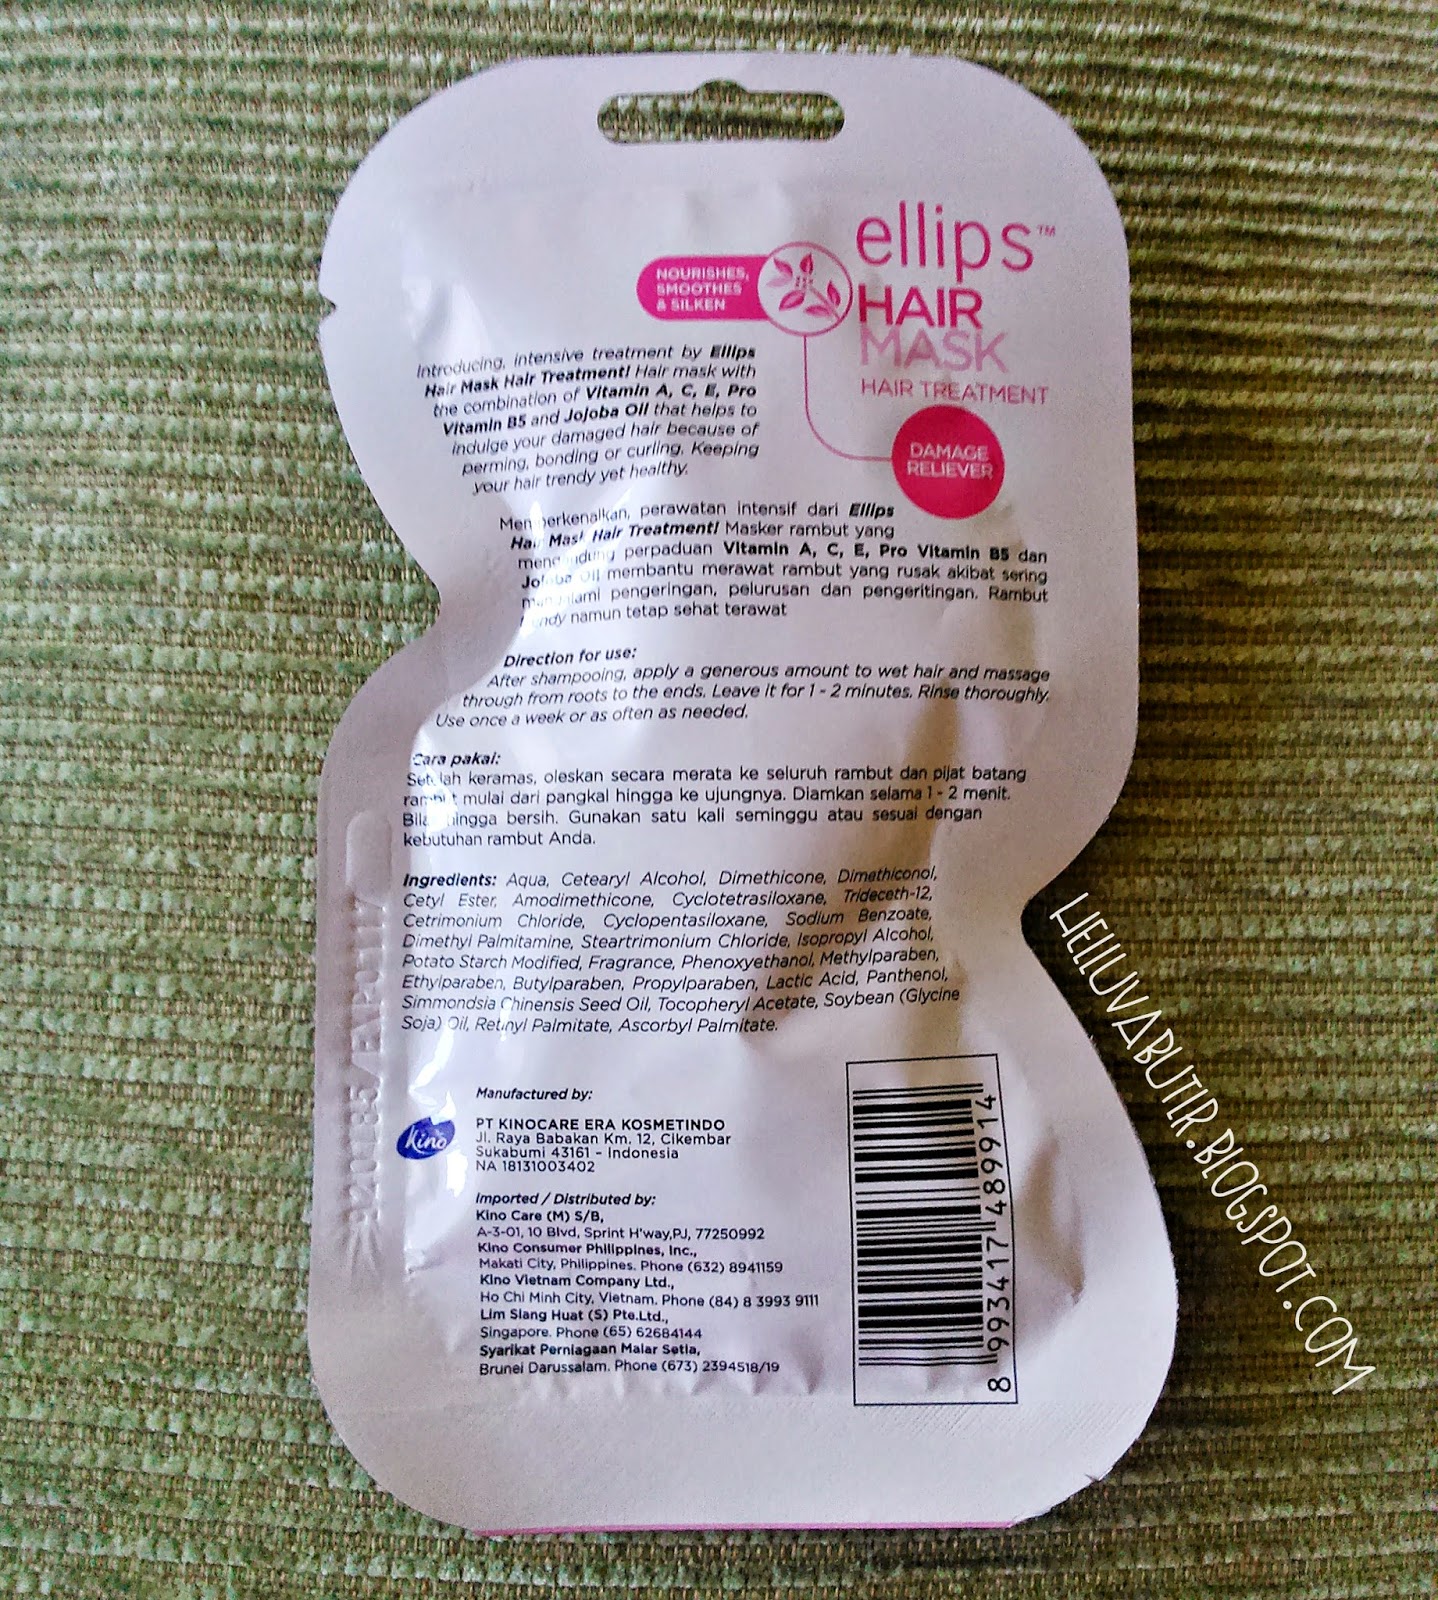 Ellips Hair Mask Damage Reliever Review Fuji Astyanis Blog